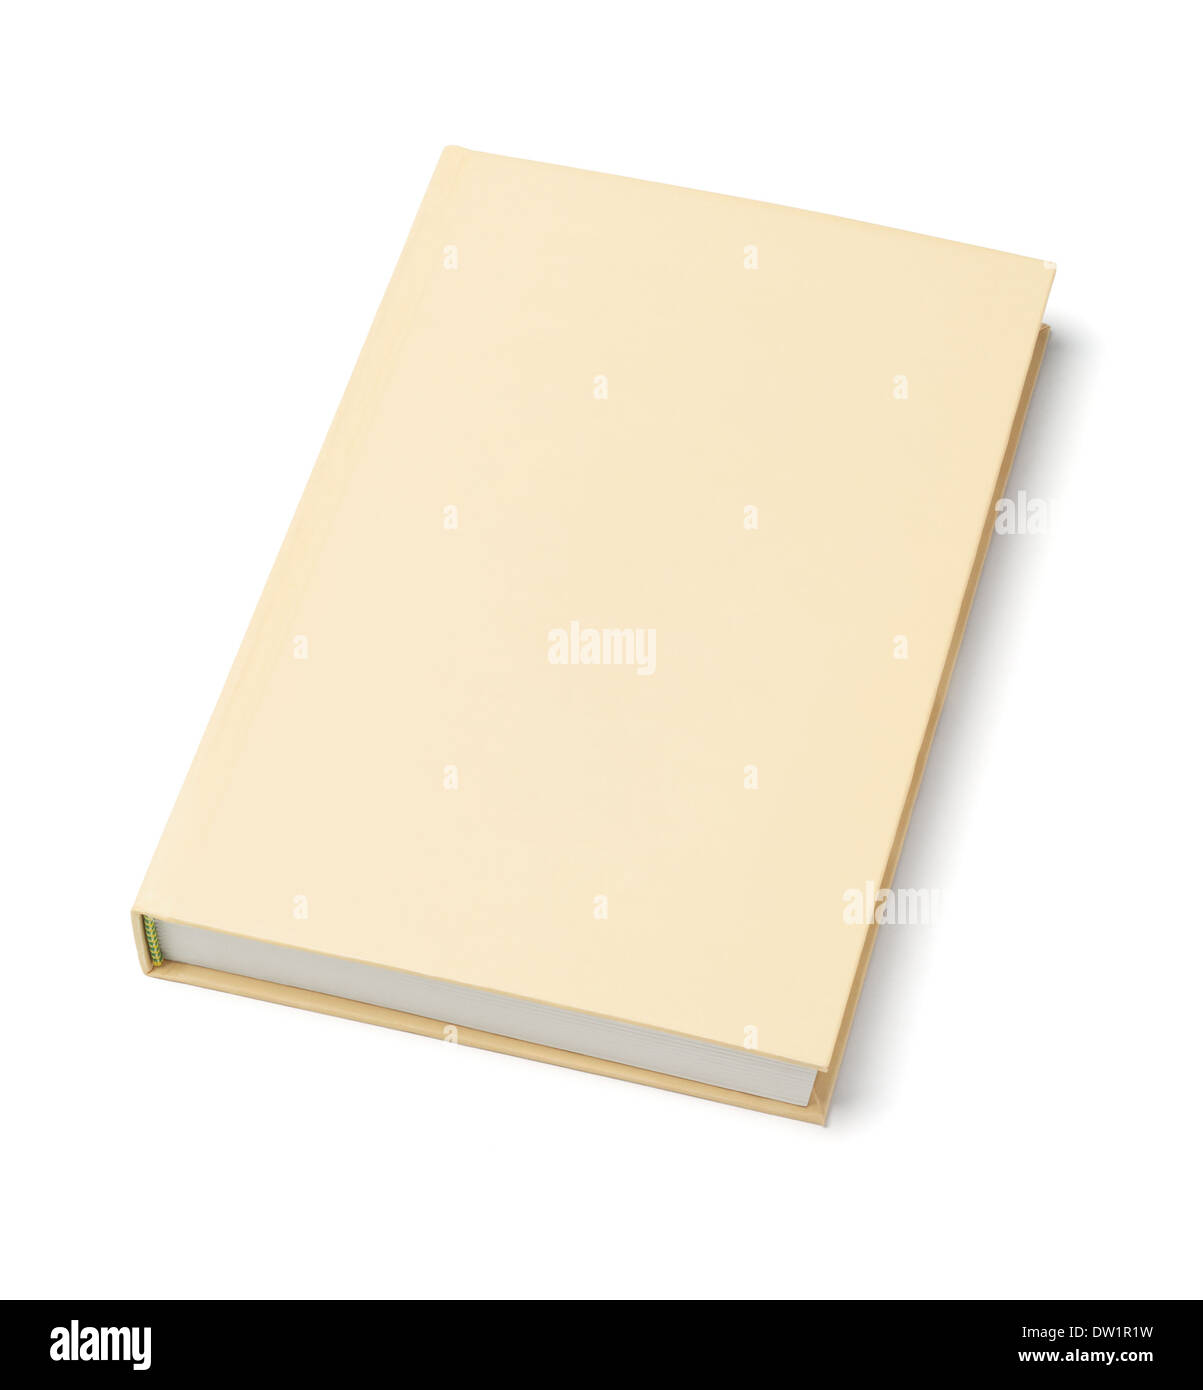 Hard Cover Book On White Background Stock Photo